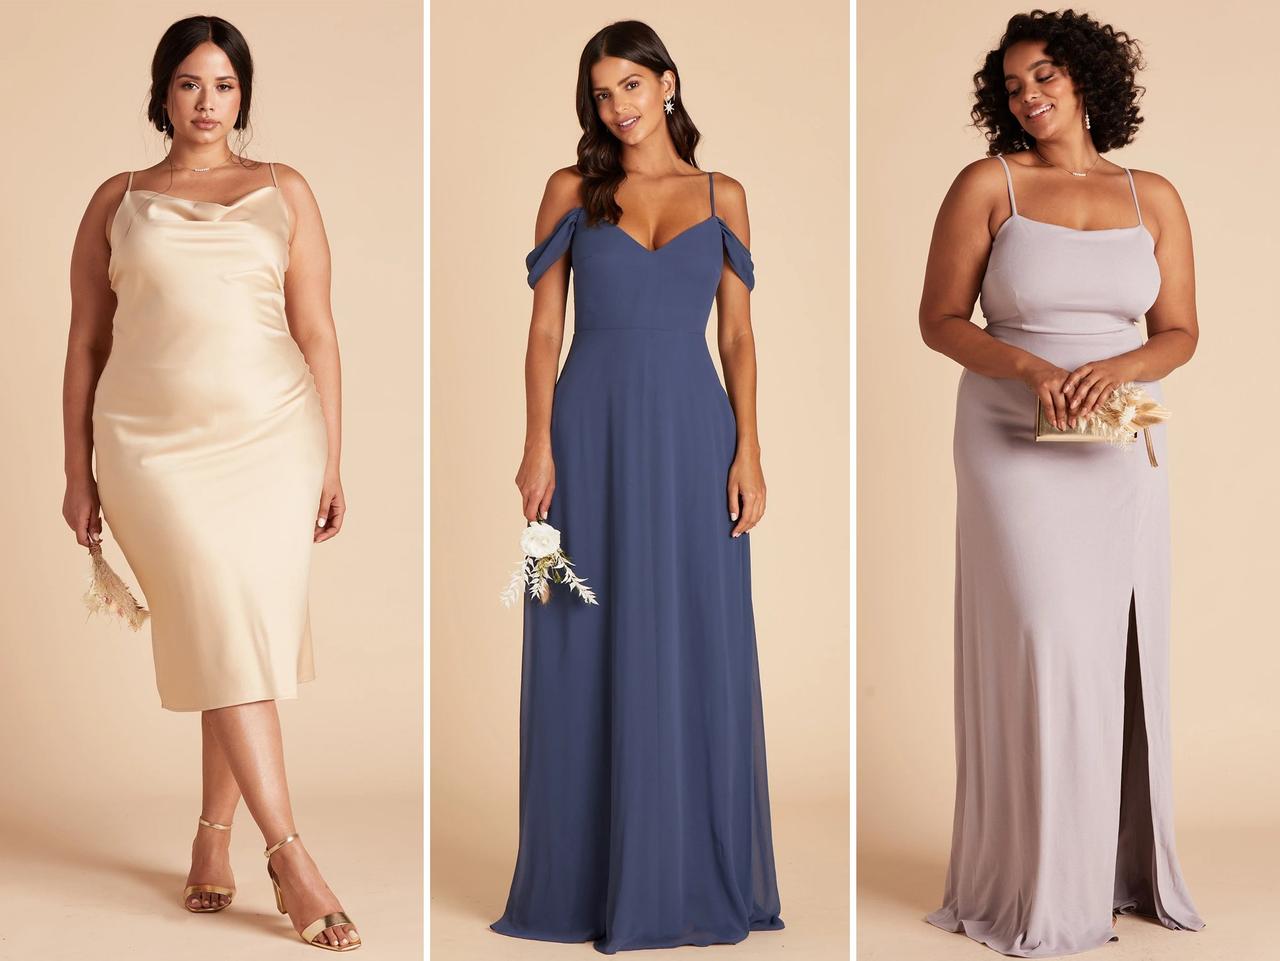 Affordable Bridesmaid Dresses - Cheap Wedding Style